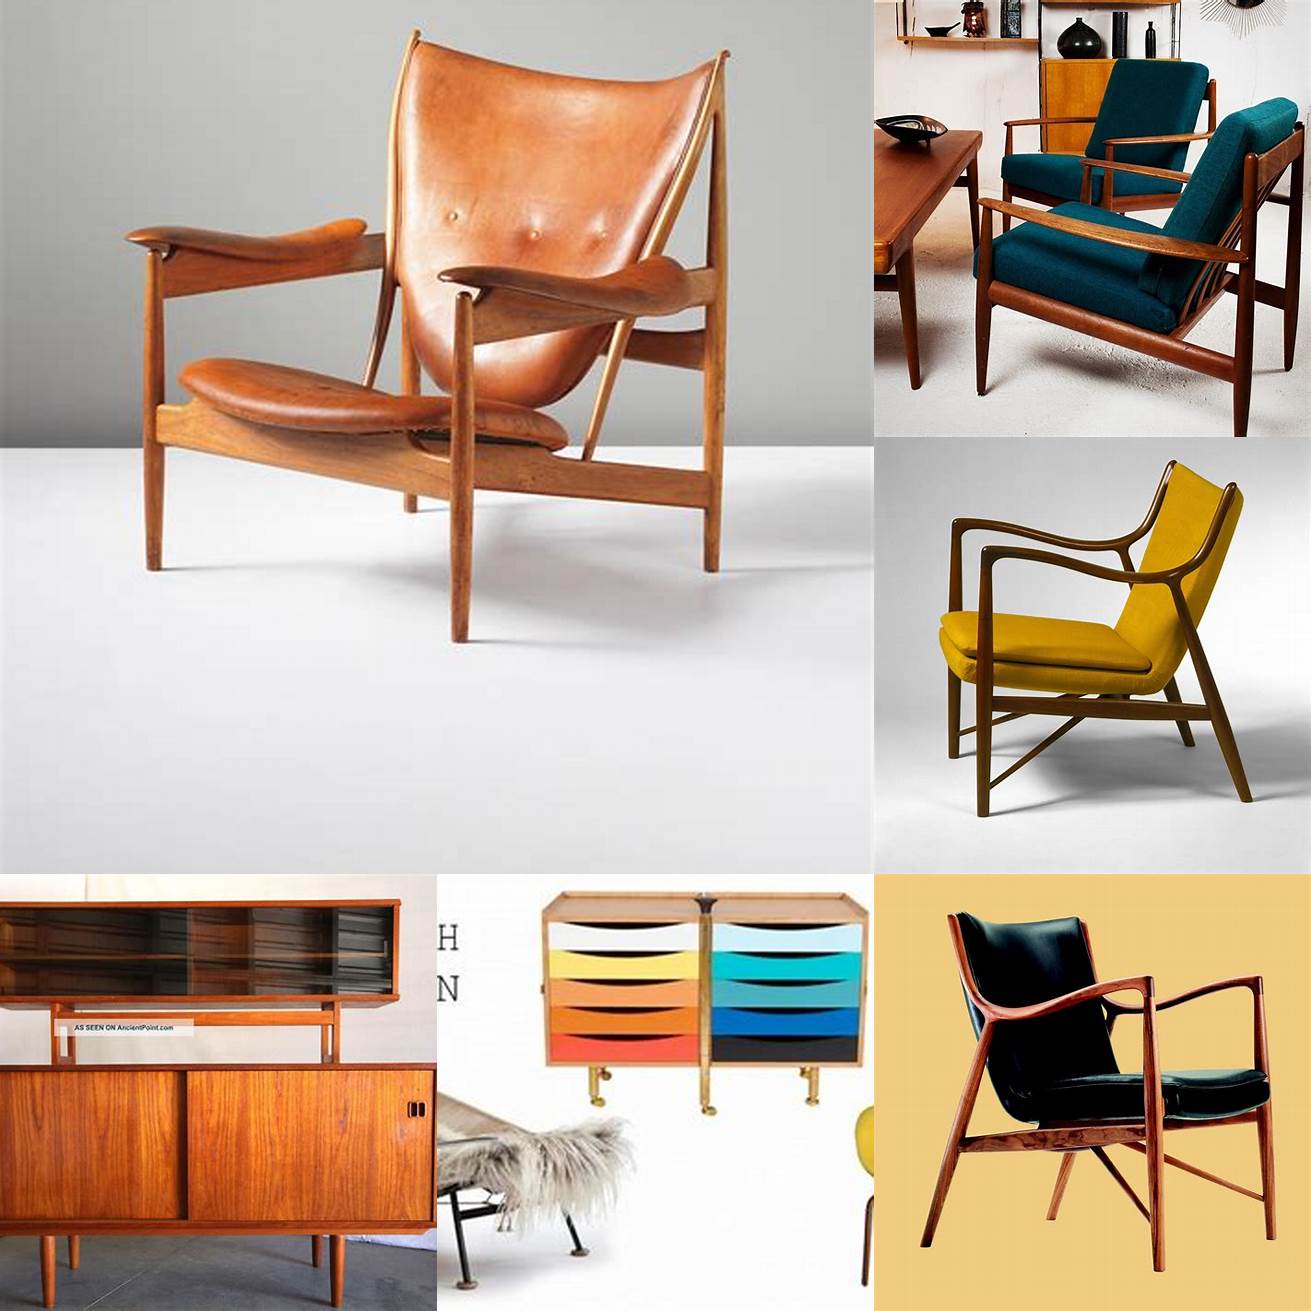 Iconic pieces of Danish furniture continue to be sought after by collectors and enthusiasts around the world